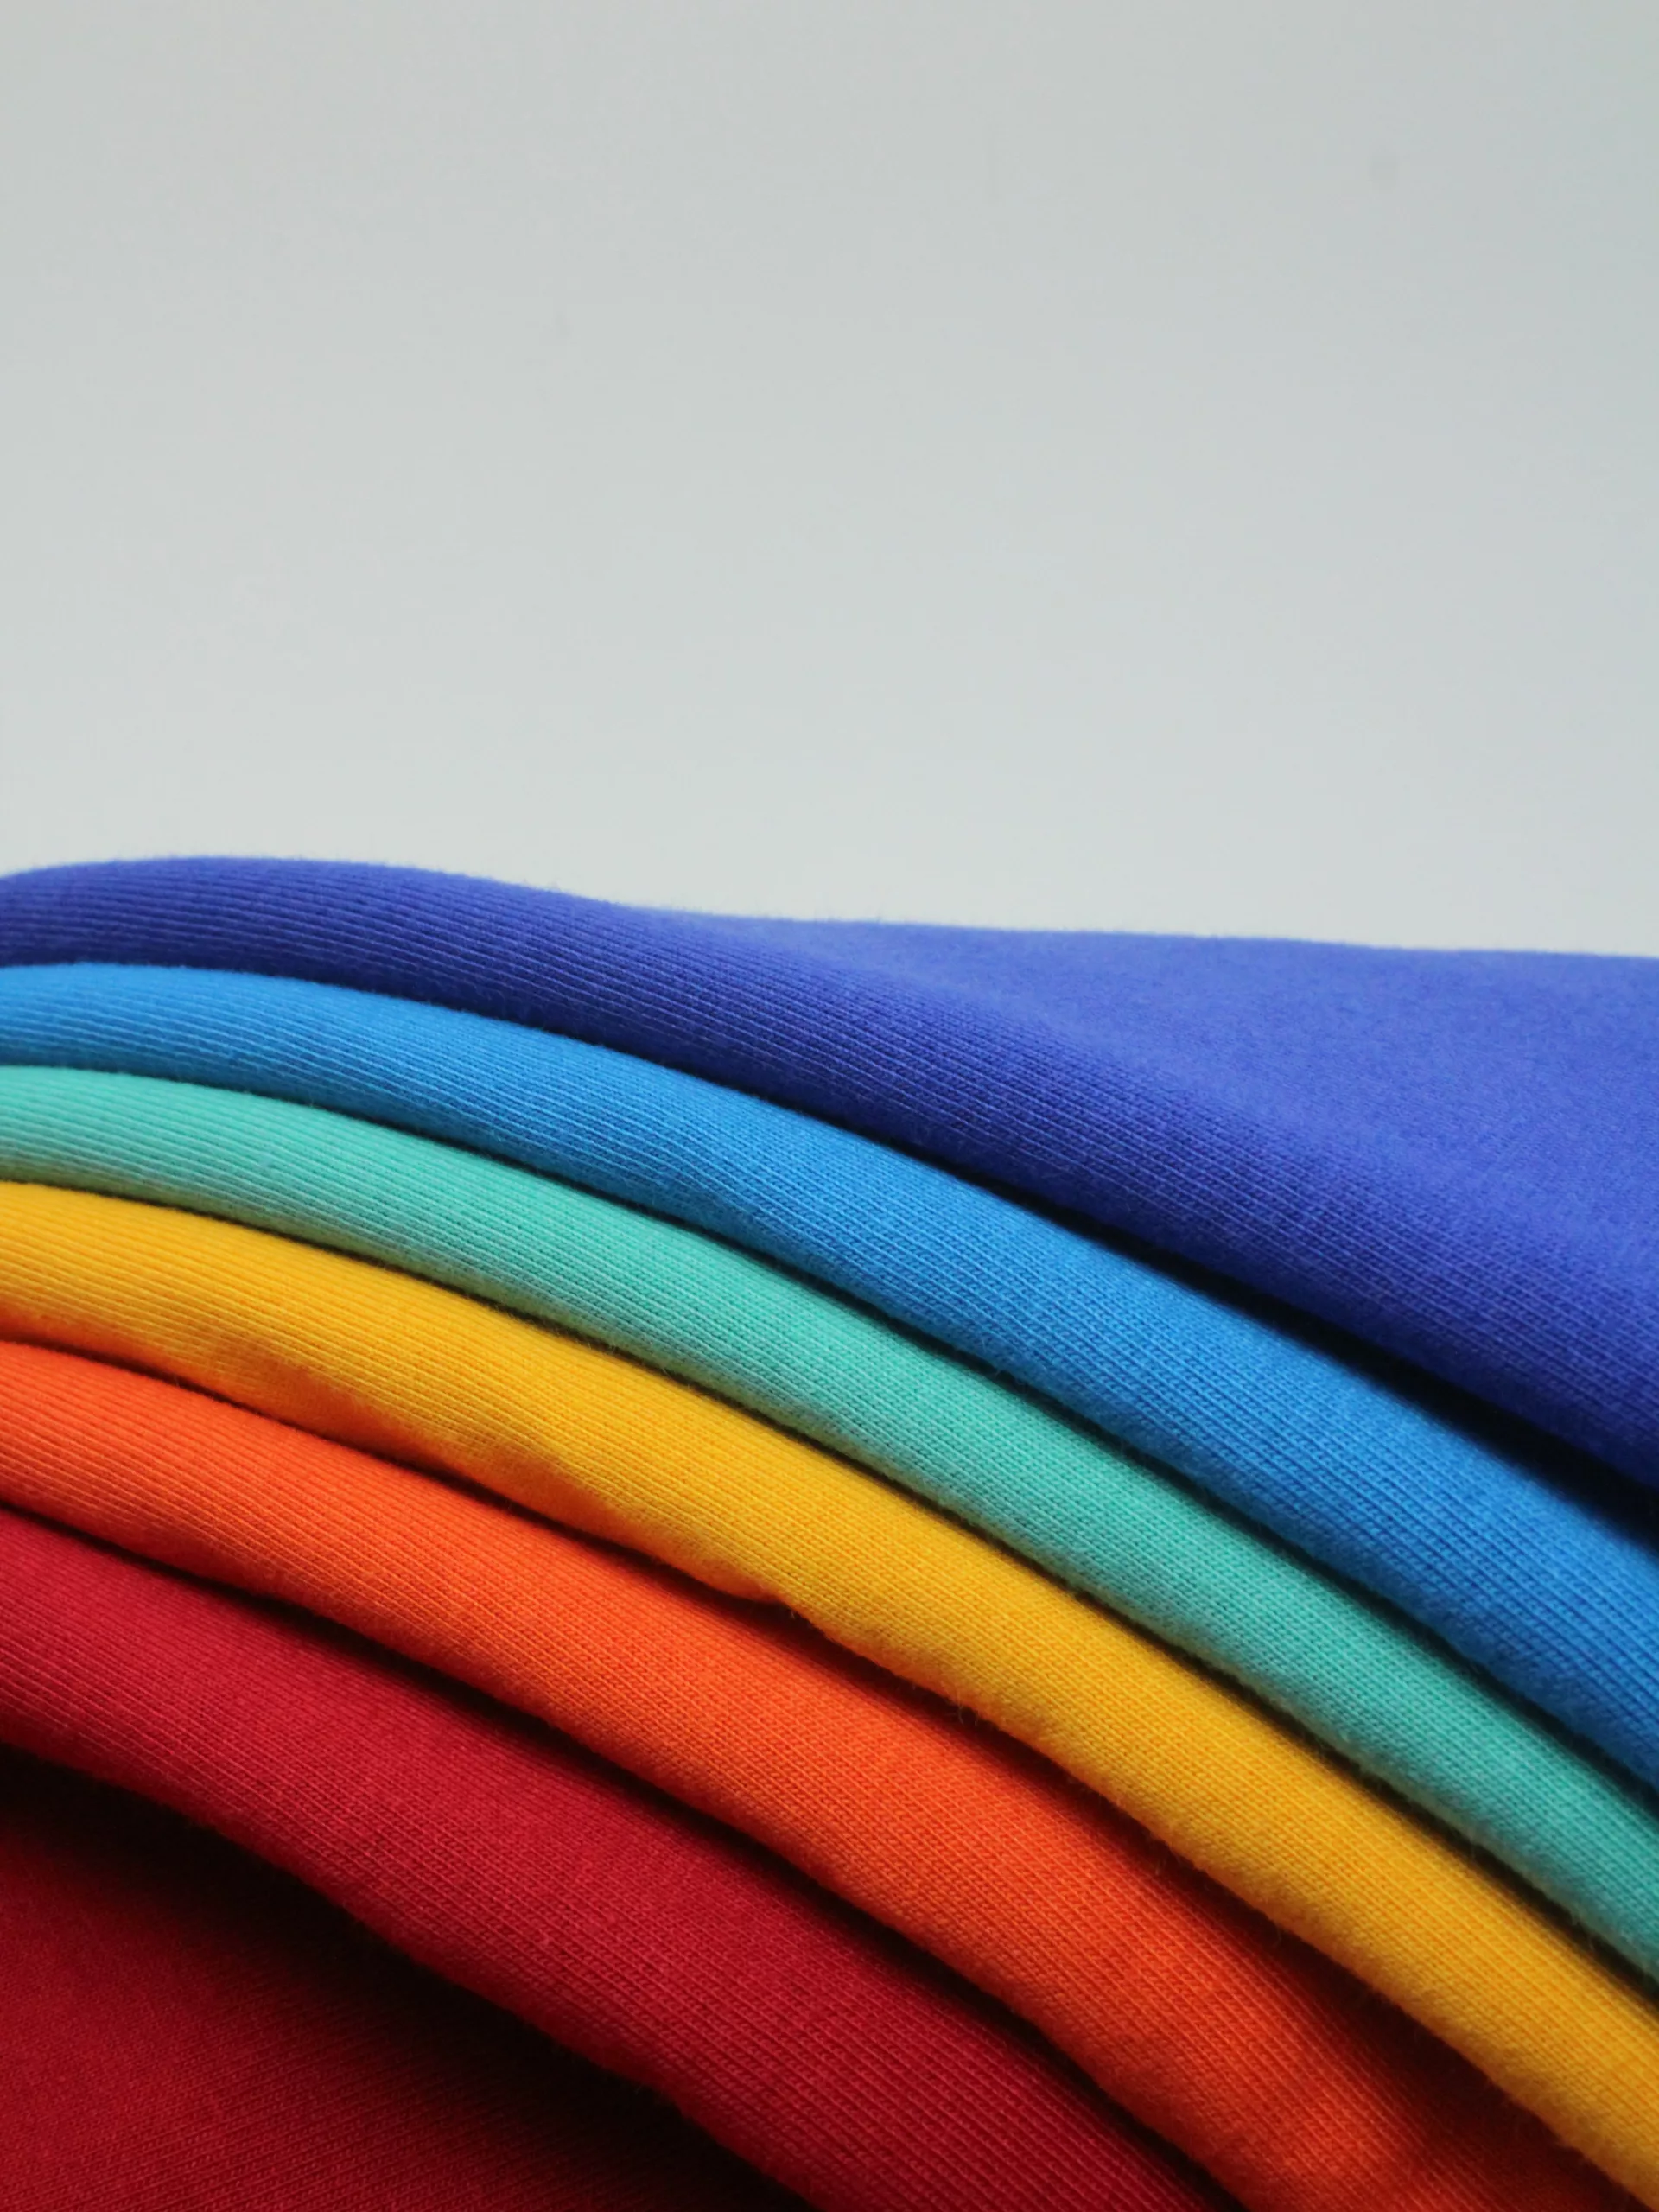 Is Polyester Stretchy? Exploring the Stretch and Sustainability of Polyester Fabrics